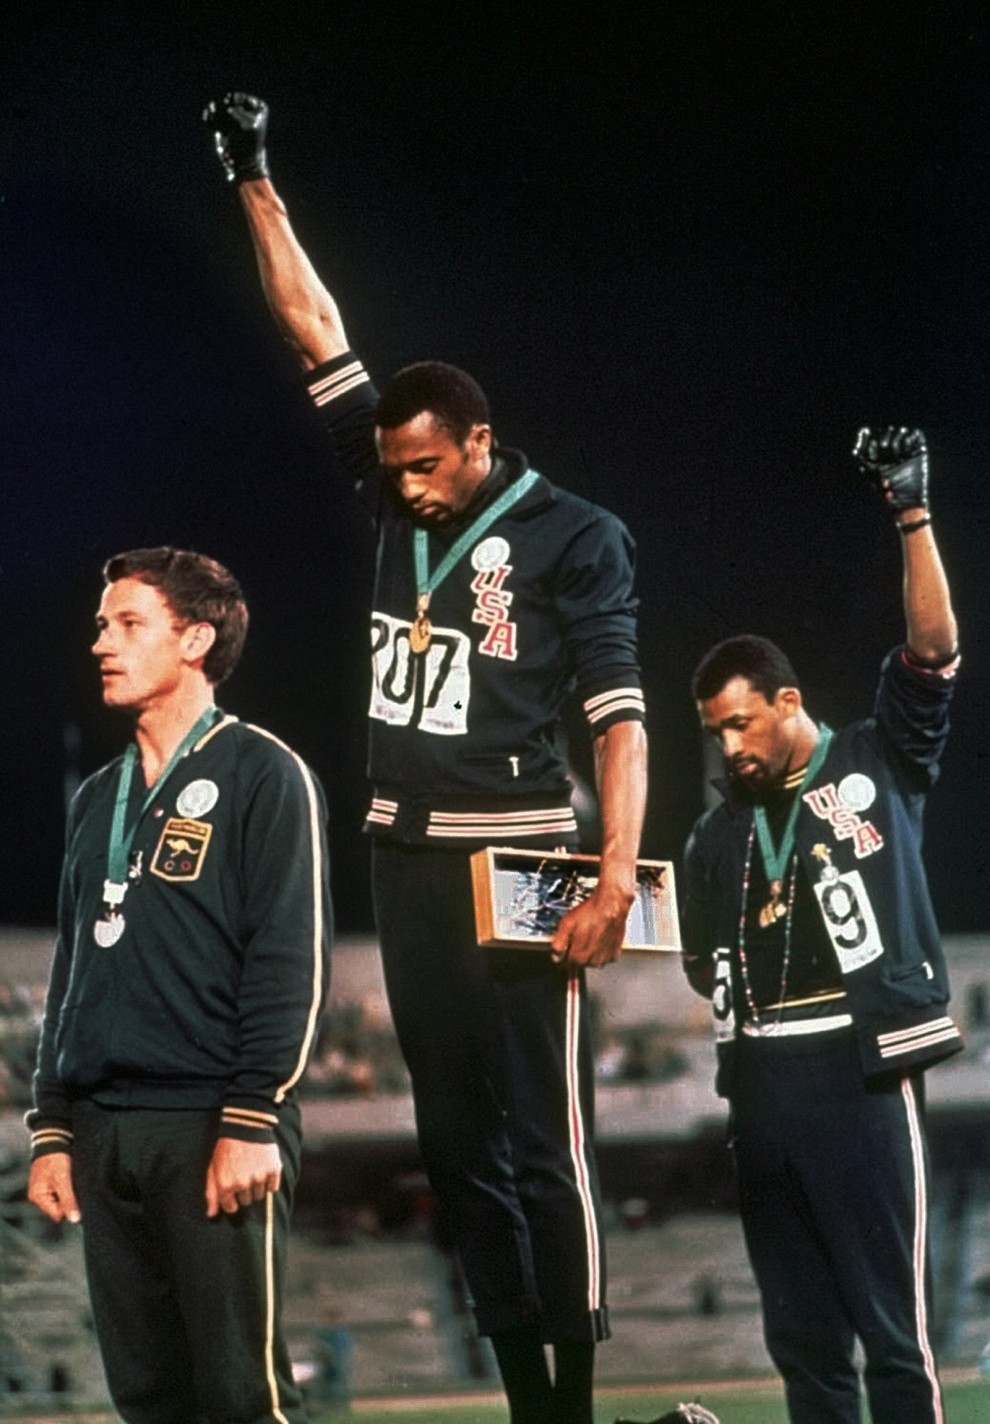 Amid a generation of conflict and racial divide, two American Olympians took to the winners podium after the 200-meter run and declared their protest for freedom and racial equality in the United States. Extending their gloved hands skyward, athletes Tommie Smith (center) and John Carlos stared downward as “The Star-Spangled Banner” played, just after Smith received the gold and Carlos the bronze at the 1968 Summer Olympic Games in Mexico City. Smith later explained, “They called it Black Power. I called it human power or cry for freedom.”. The silver medalist in photo is Australian Peter Norman, he suggested they share the black gloves and the three of them became lifelong friends; Smith and Carlos were actually pallbearers at his funeral.